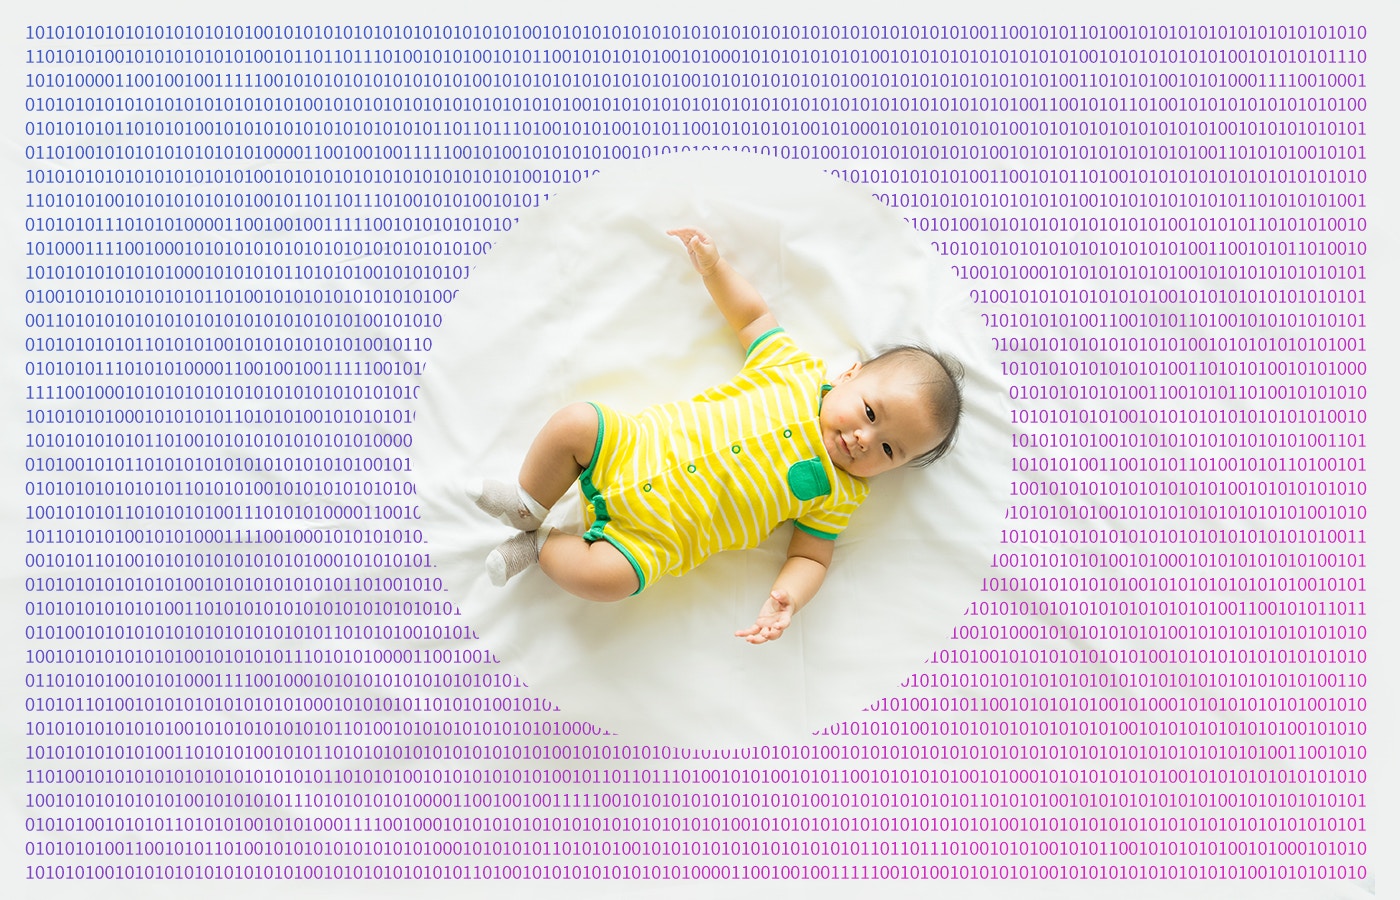 toddler in a bed sheet printed with binary digits 